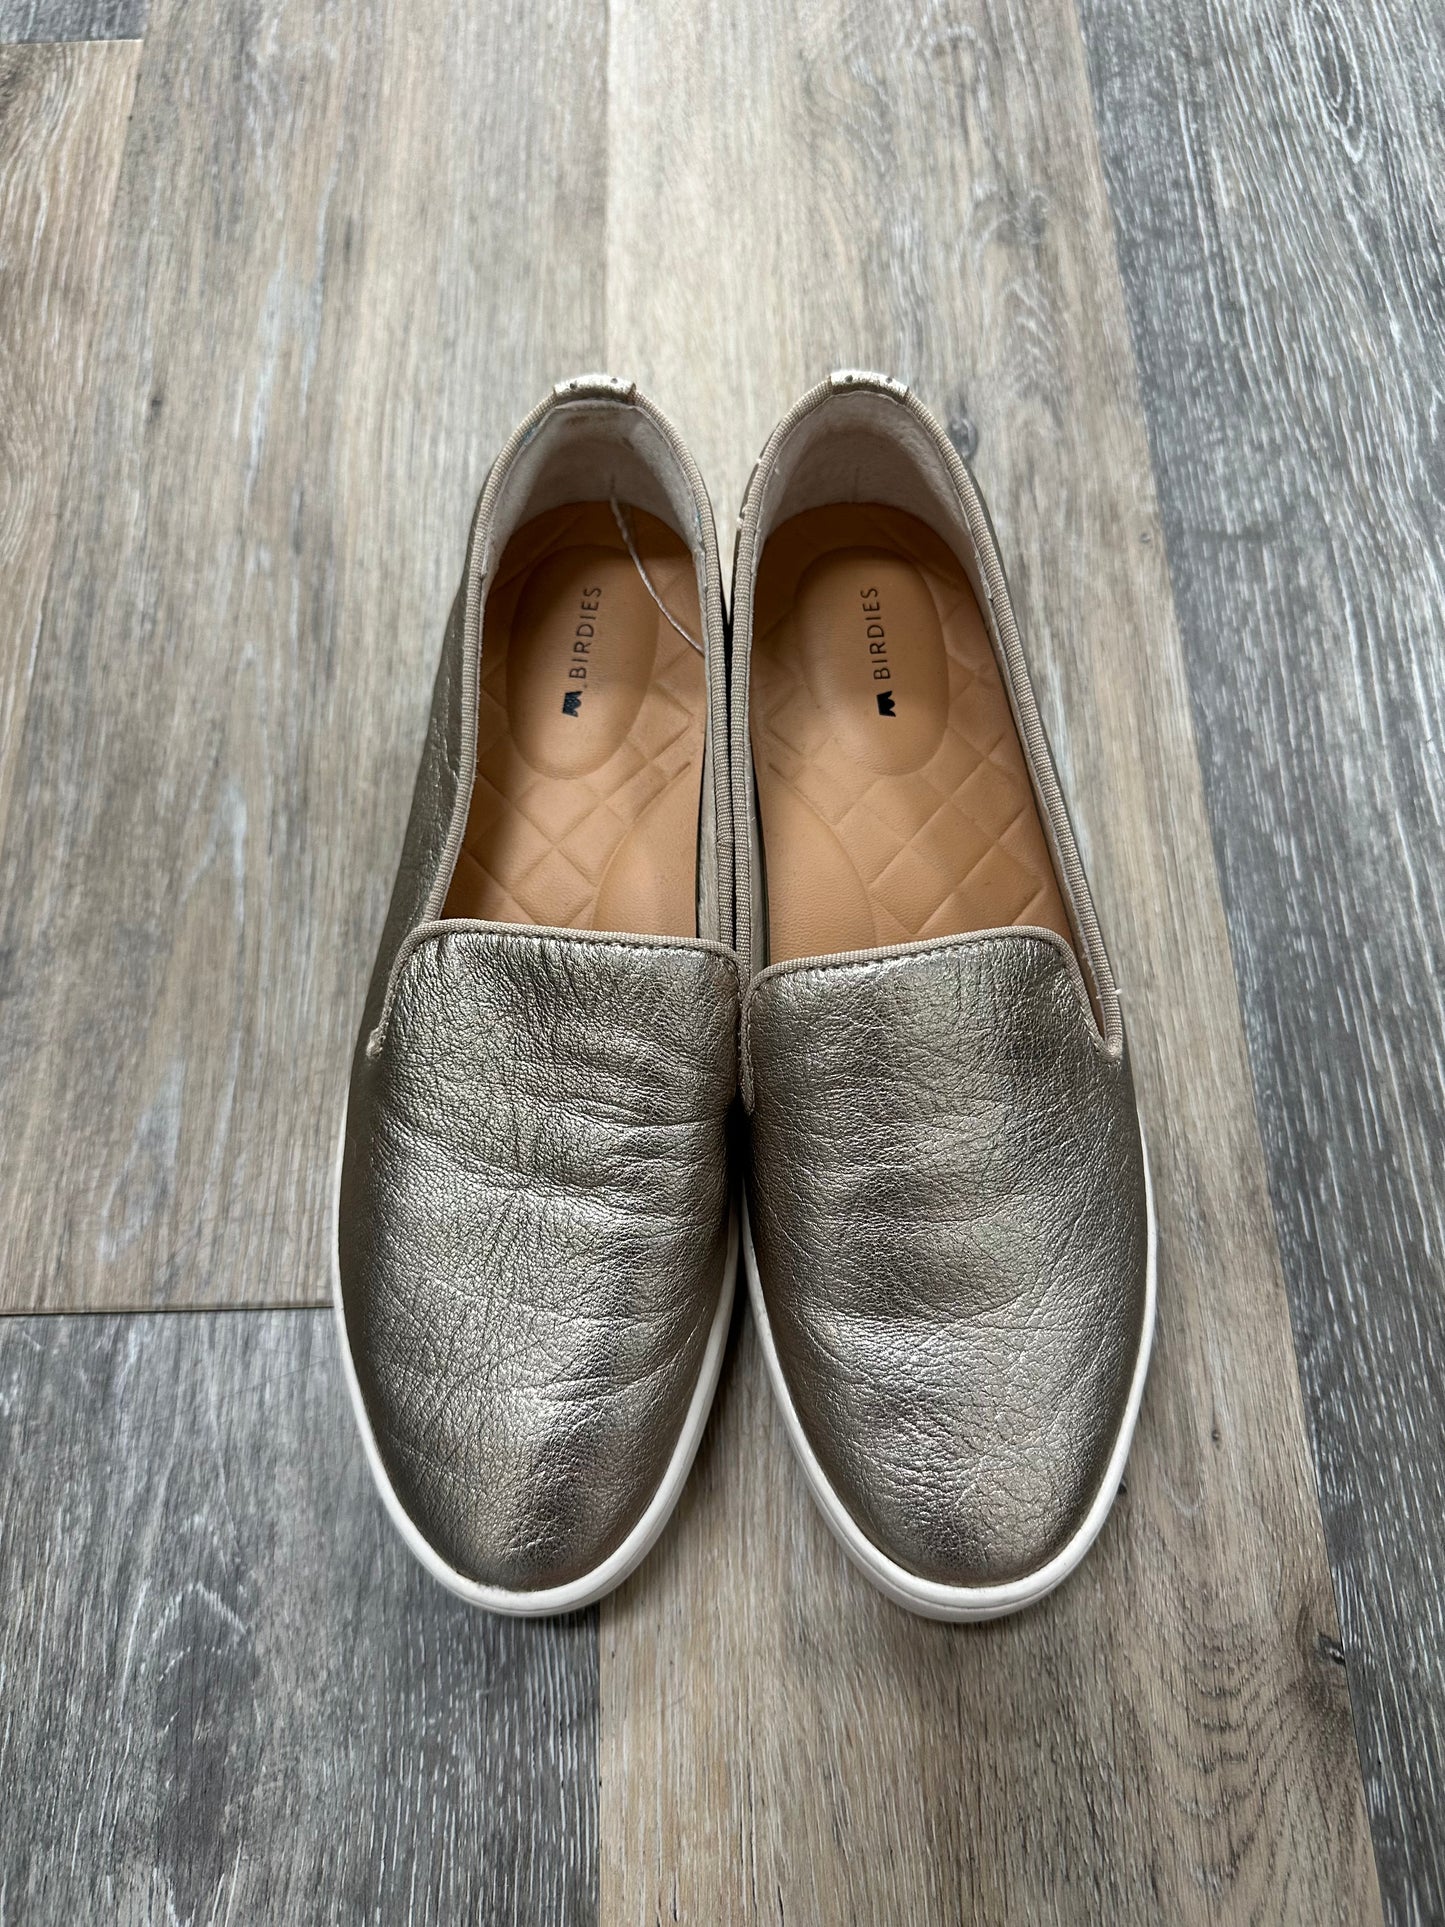 Shoes Flats Loafer Oxford By Birdies  Size: 6.5